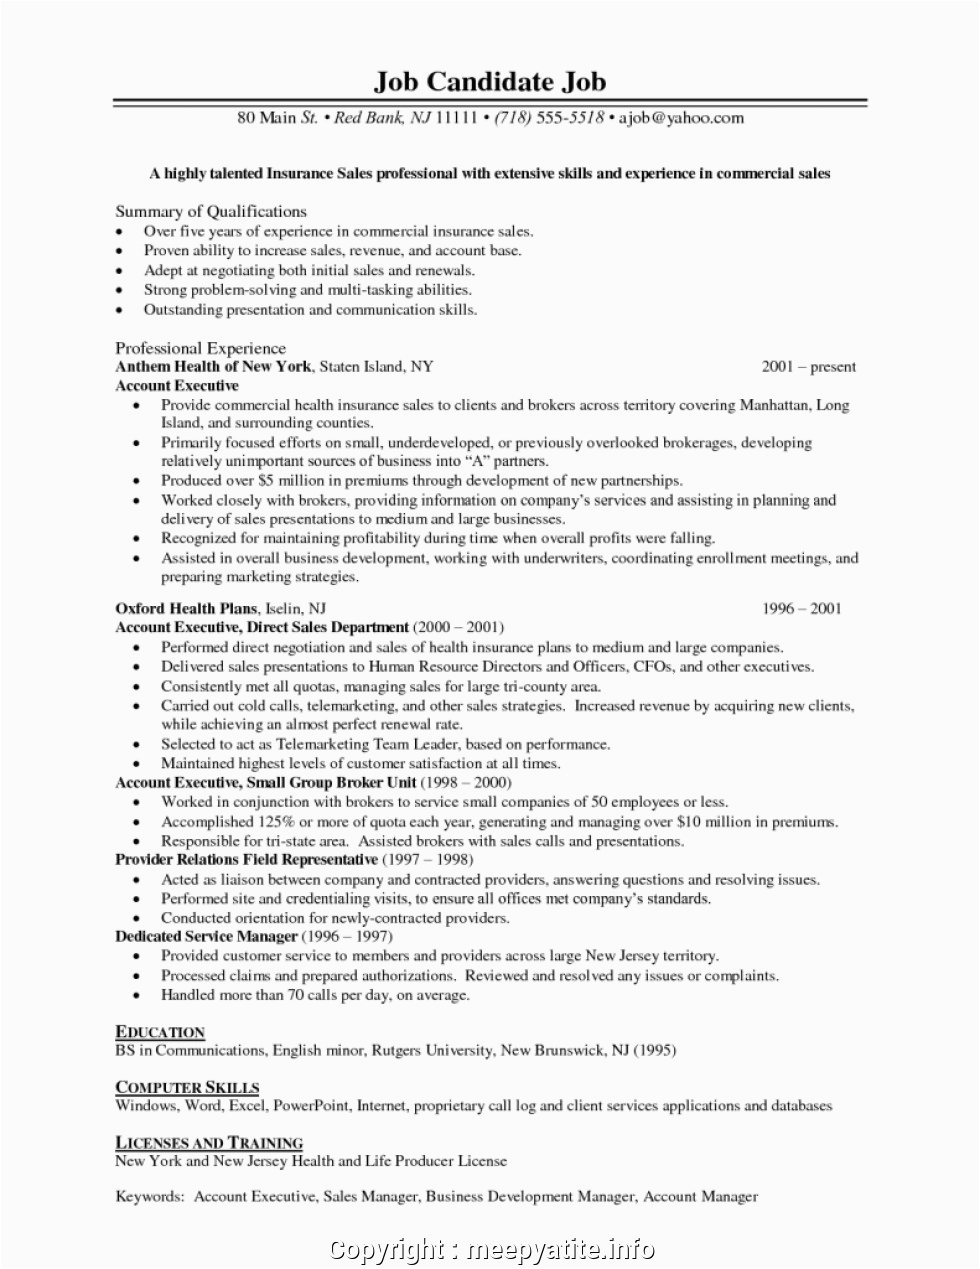 Sample Resume for Insurance Sales Manager Professional Sales Manager Insurance Resume 15 Insurance